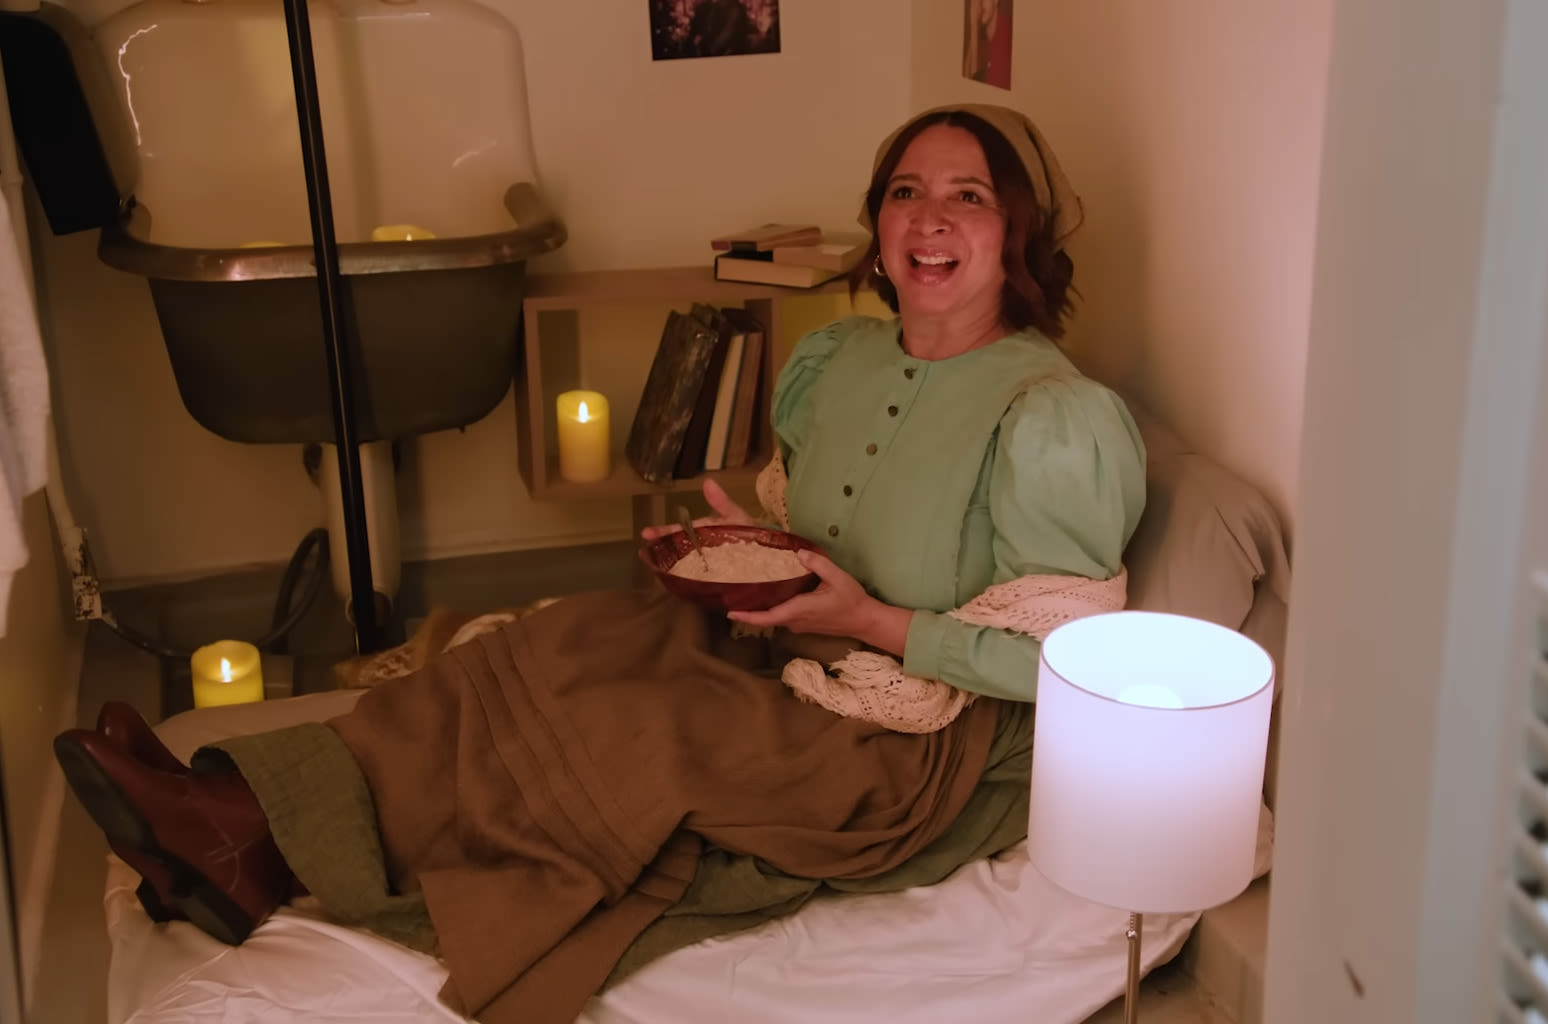 Maya Rudolph Reveal She’s Been Living in ‘SNL’ Closet Since 2007 in New Promo